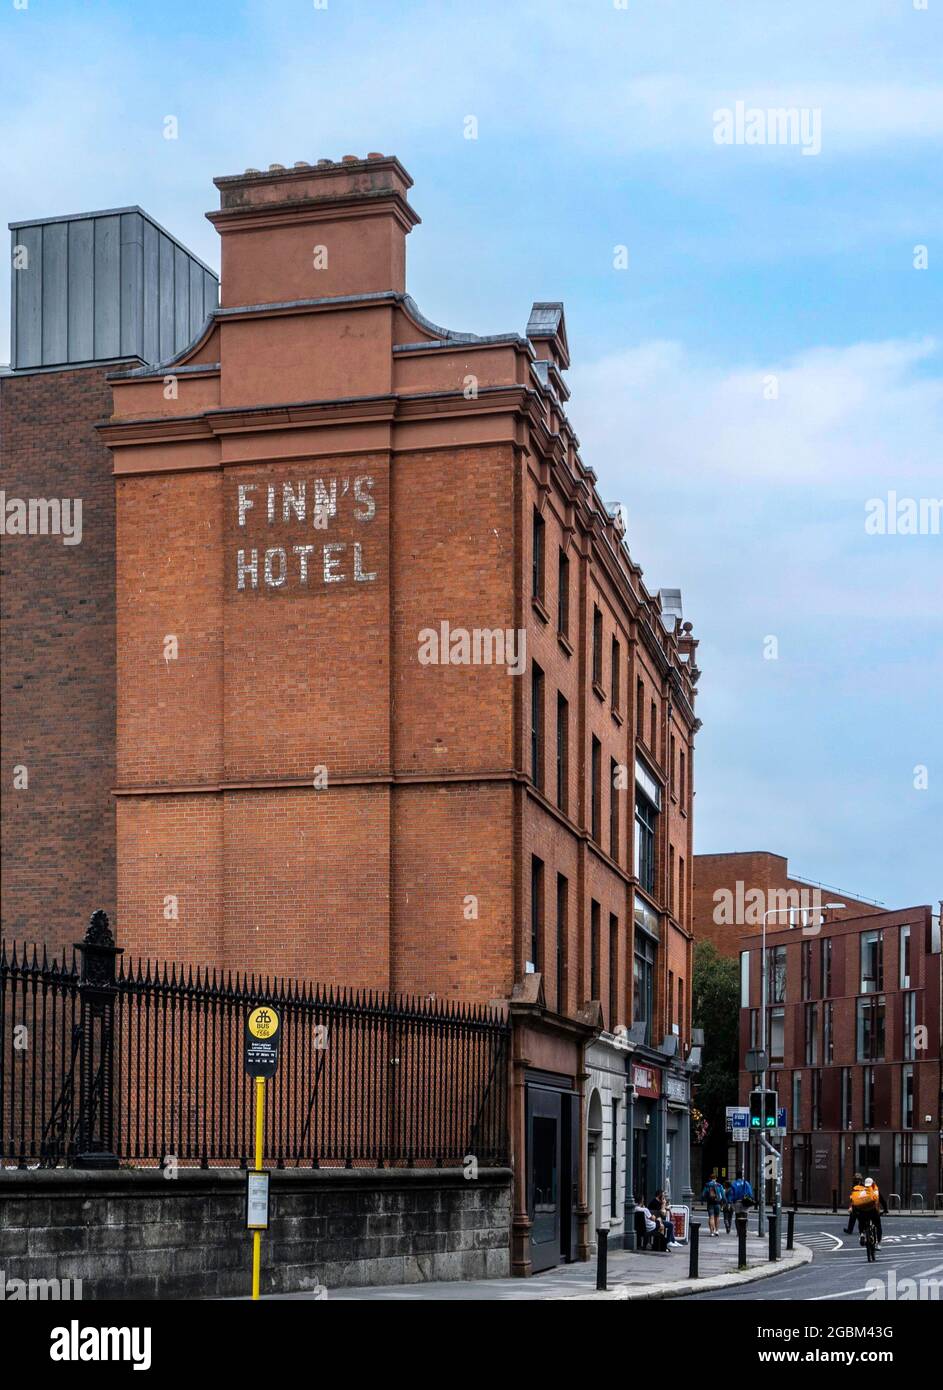 The Finns Hotel sign on Sth Leinster St, Dublin, Ireland. Nora Barnacle, was employed here, when James Joyce met her on June 16th 1904, Bloomsday. Stock Photo